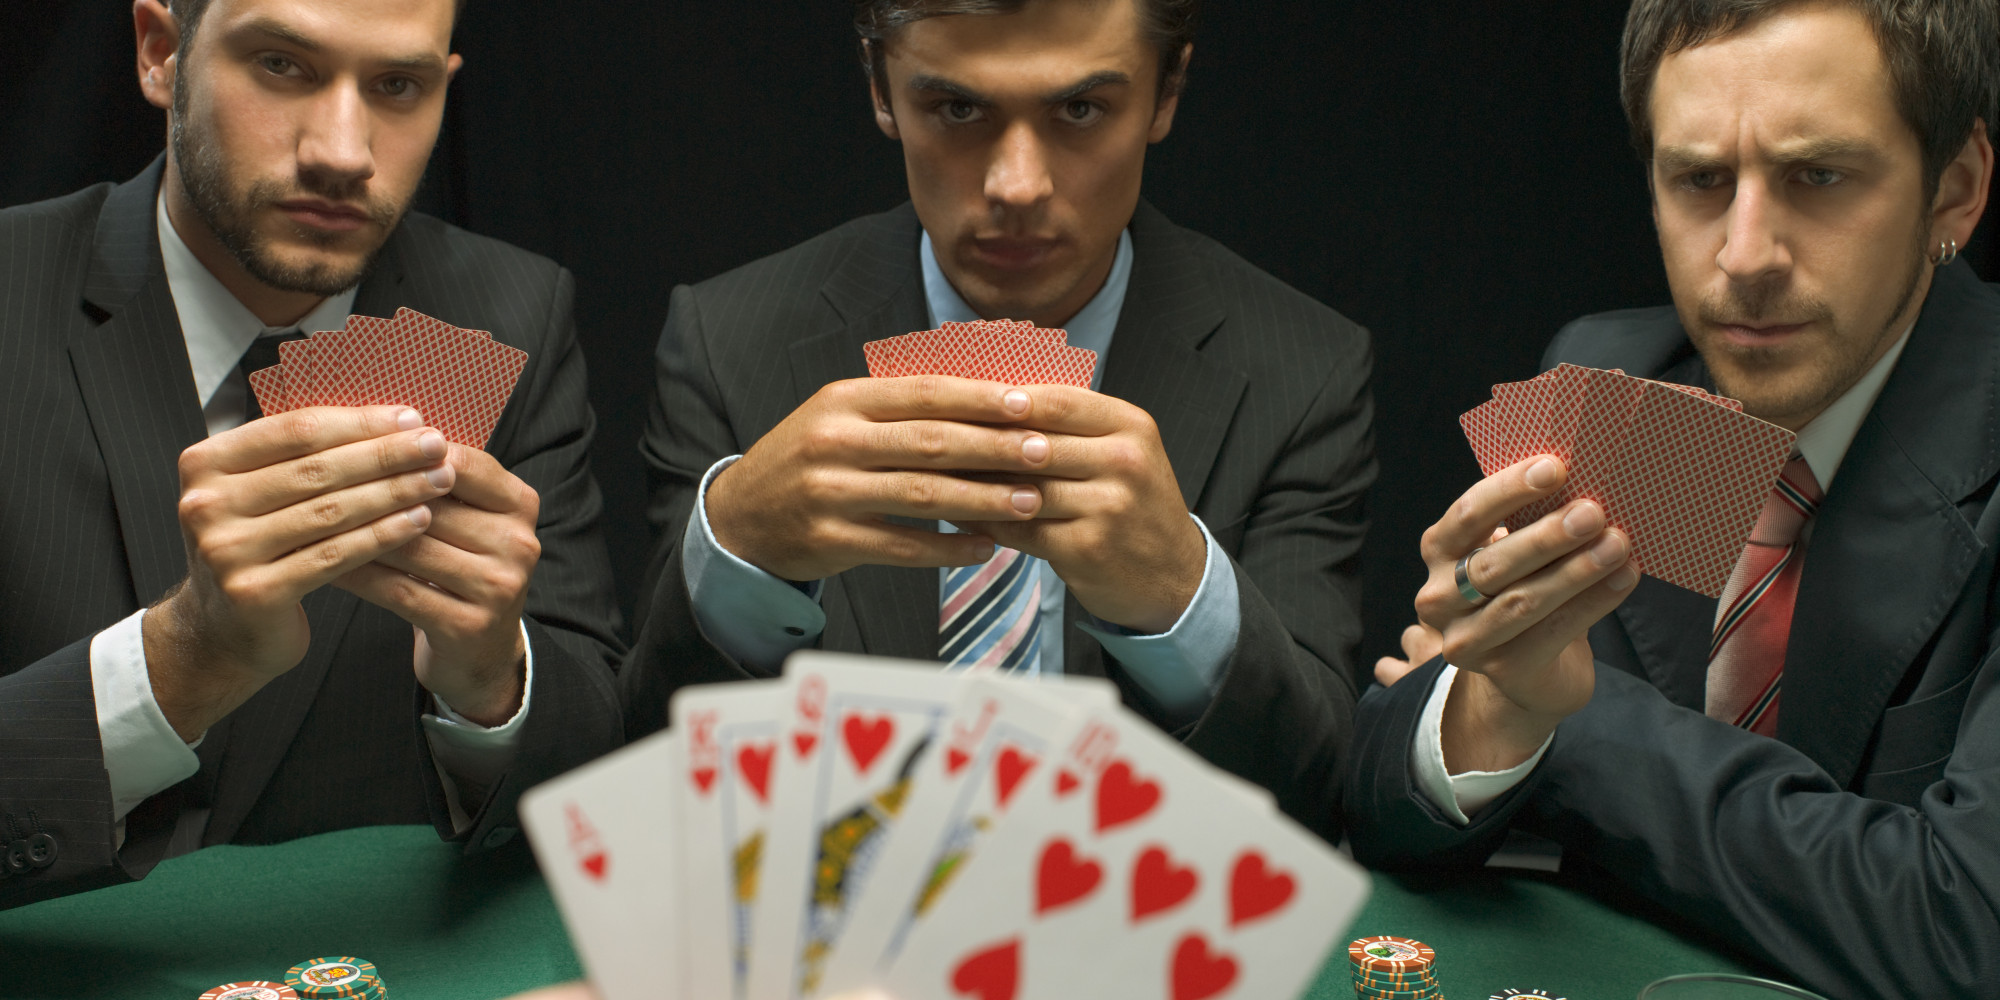 Online Casino Guidelines - What Should You Look For? 2